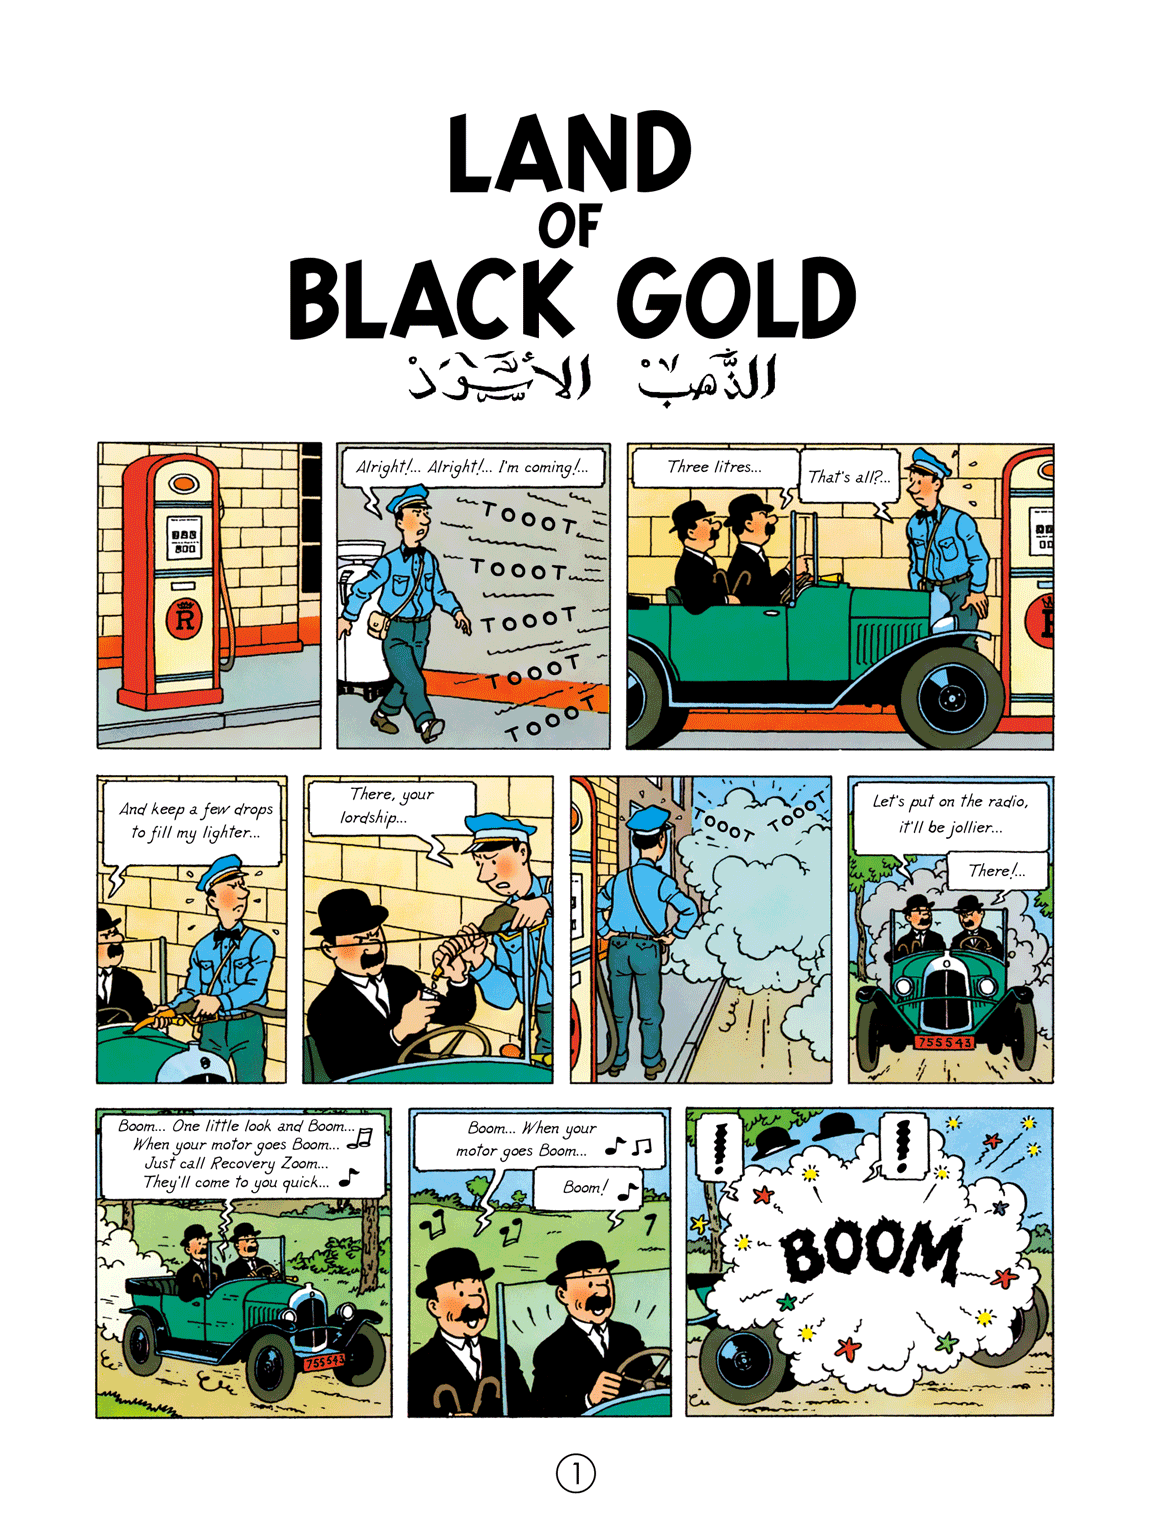 Land of Black Gold (The Adventures of Tintin) by Hergé